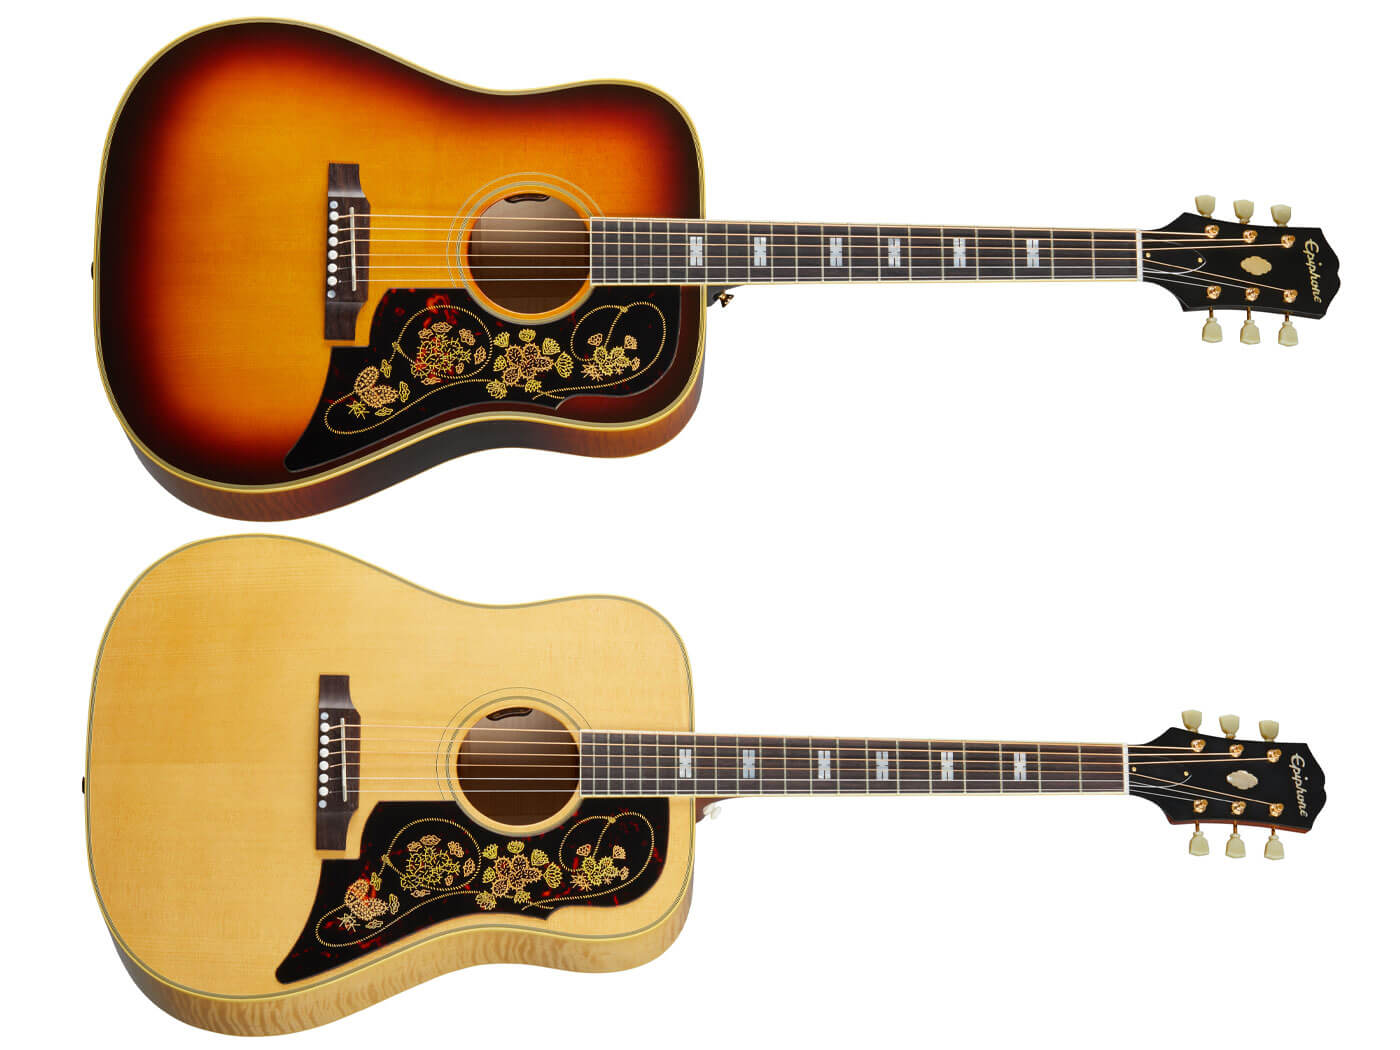 Epiphone revives the made-in-USA Frontier acoustic | Guitar.com | All  Things Guitar